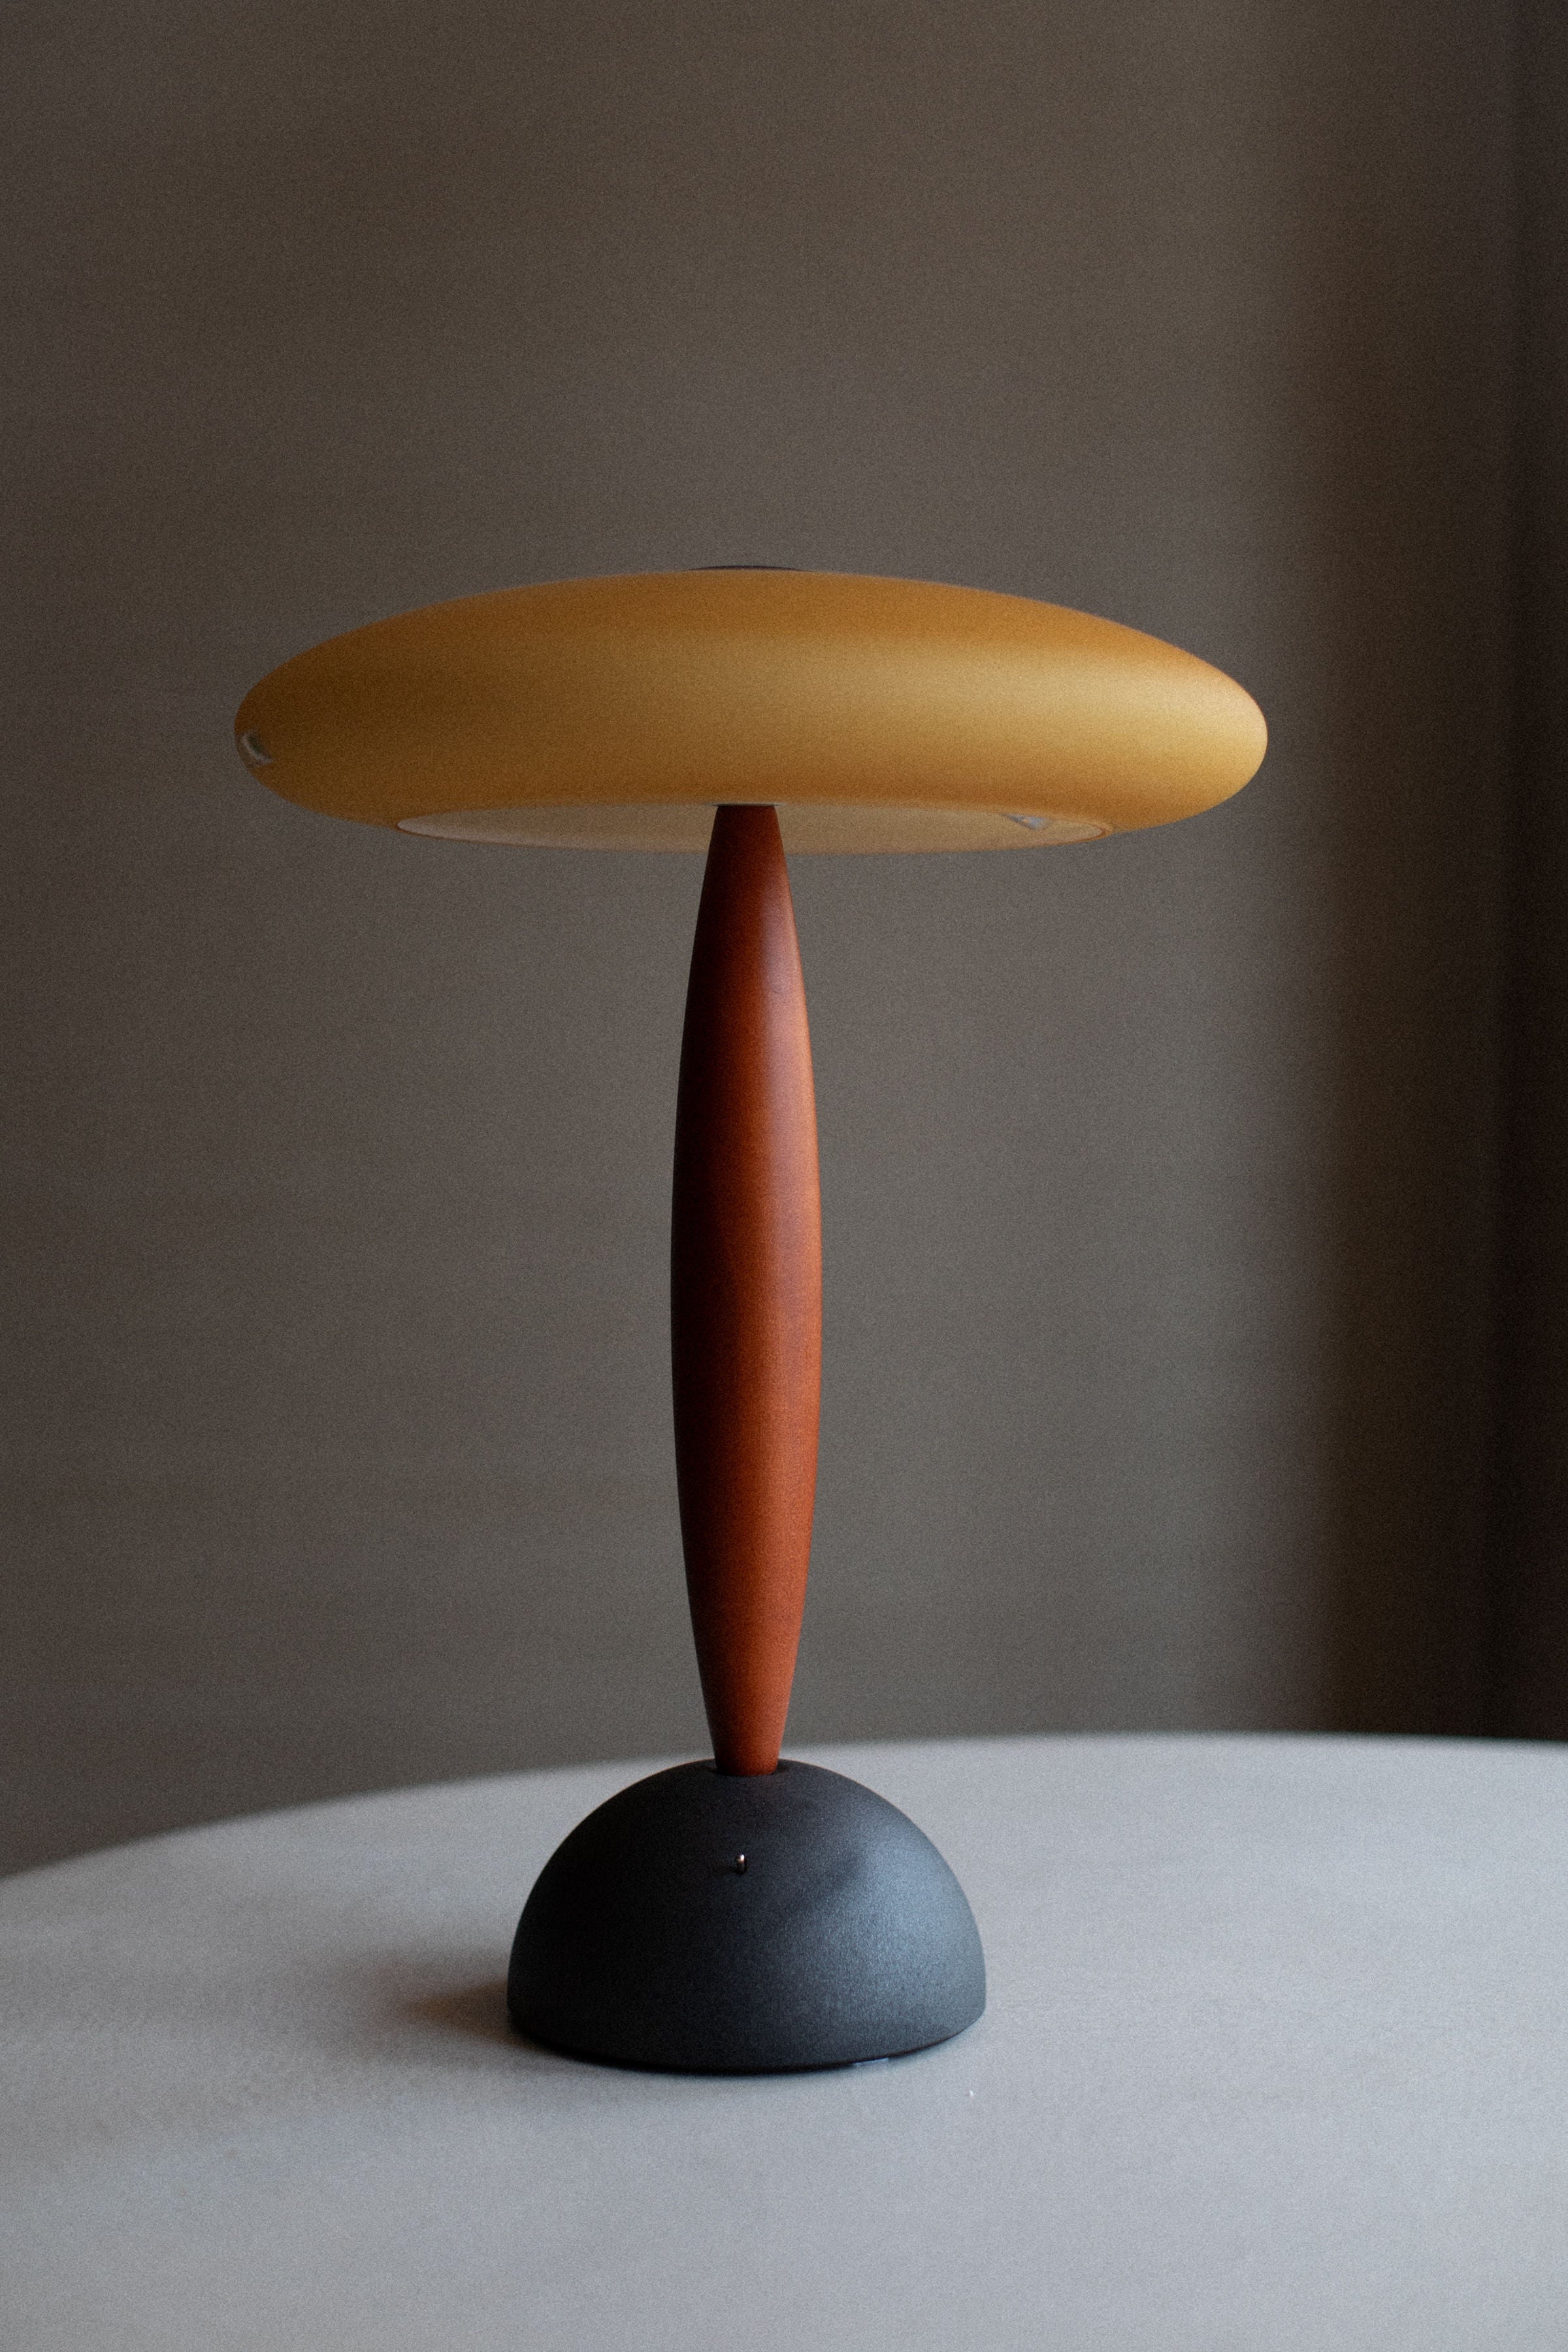 A modern Vintage Murano Lamp with an elliptical yellow shade balanced atop a slender, vertical brown stand, handcrafted by Murano glassmakers, which is mounted on a round, flat black base, against a